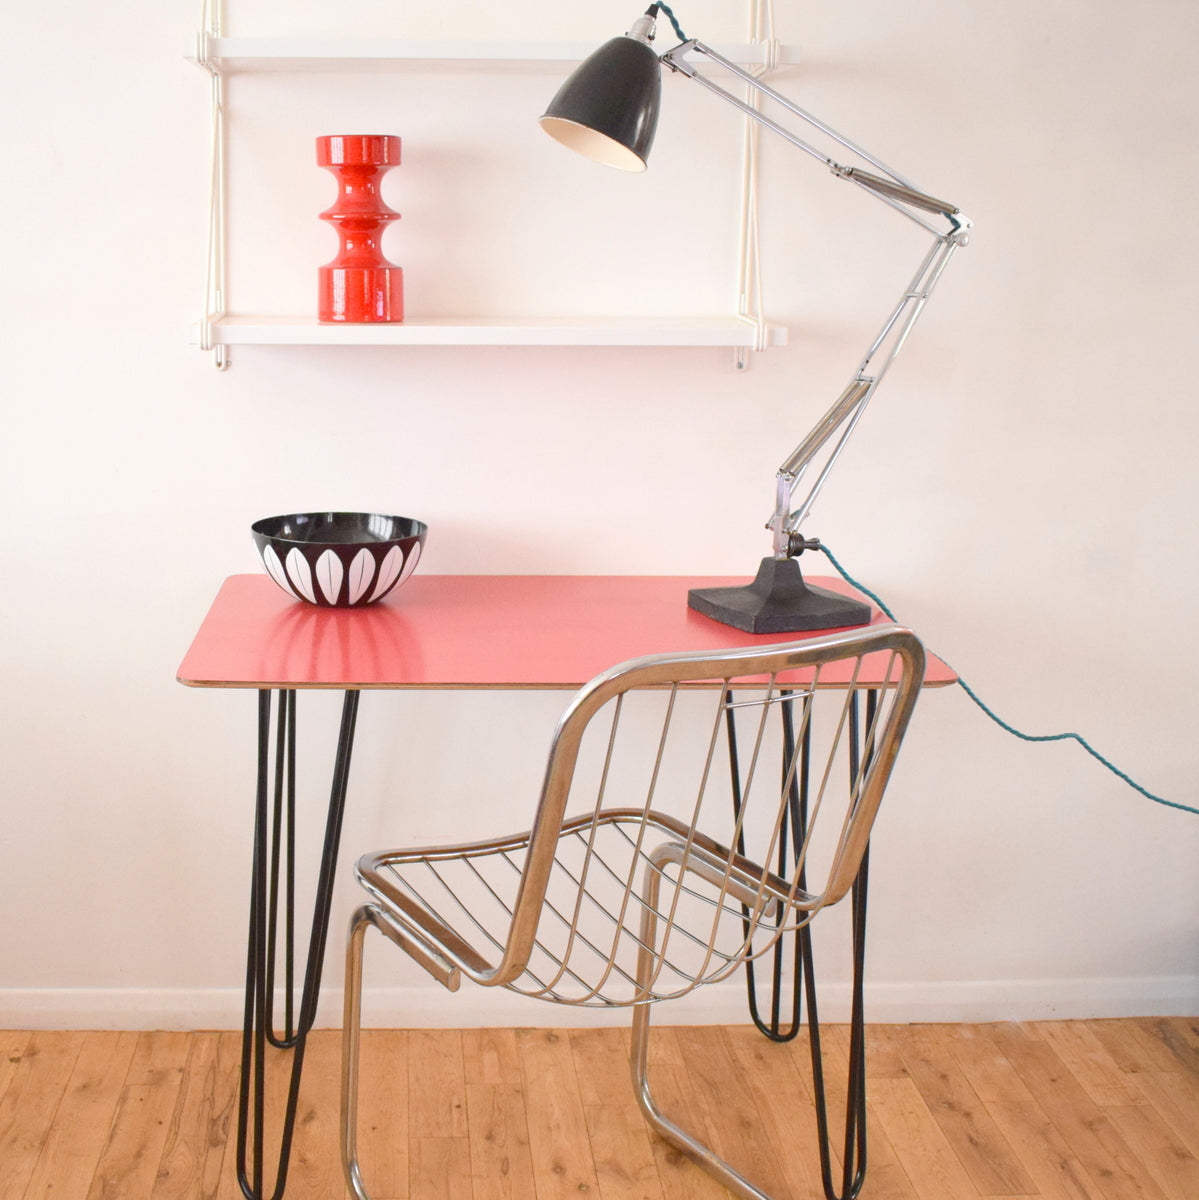 Vintage 1950s Formica Table - Hairpin Legs - Ideal Desk, Red / Black